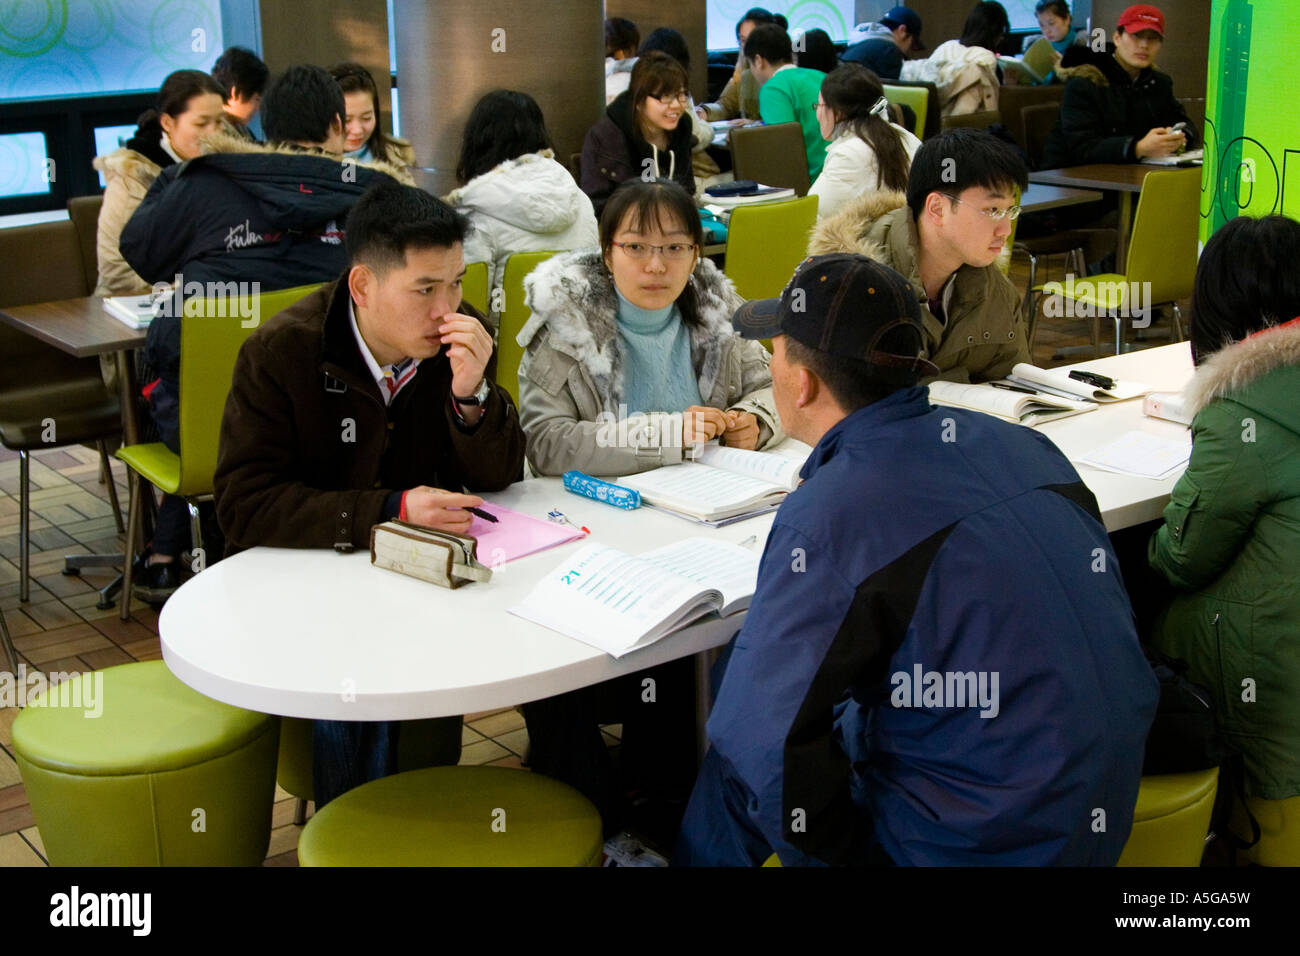 University Students Study together at a Cafe before Class Seoul Korea Stock Photo